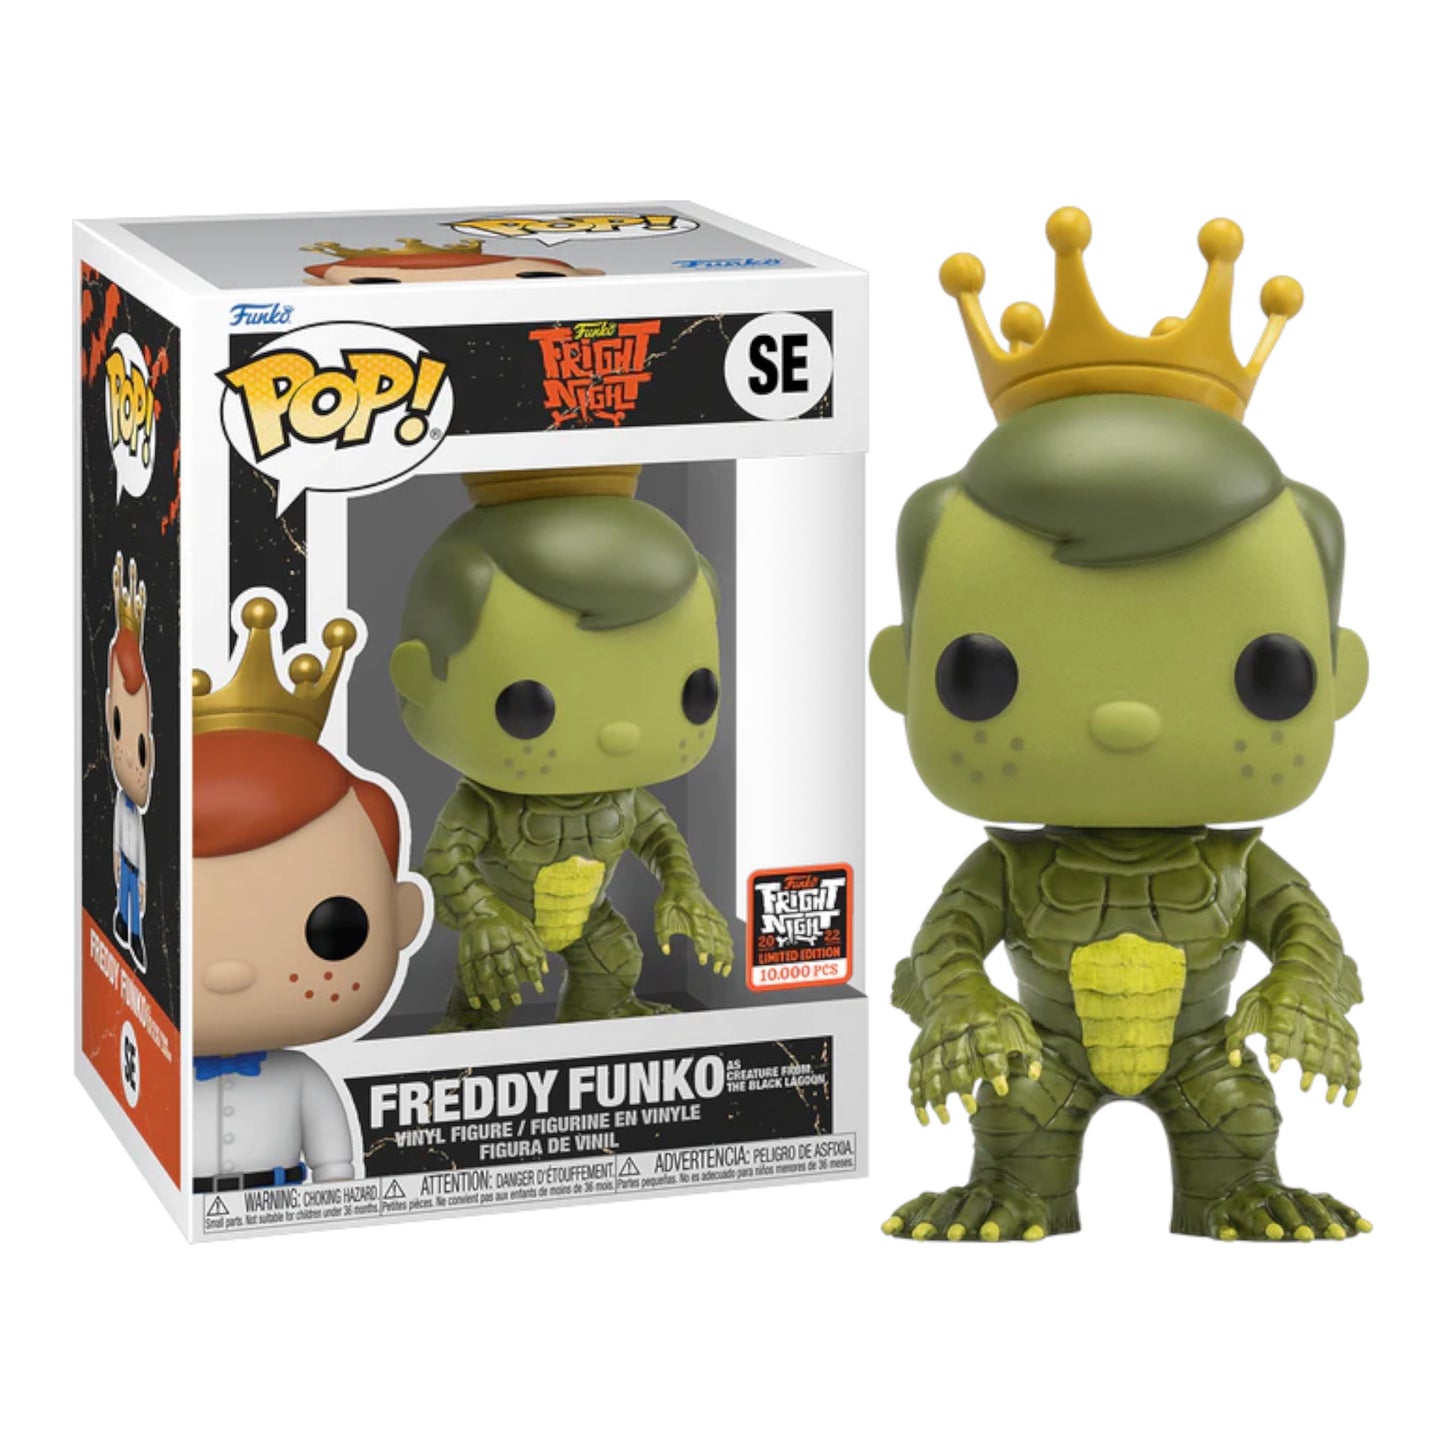 Freddy Funko as the Creature From the Black Lagoon SE